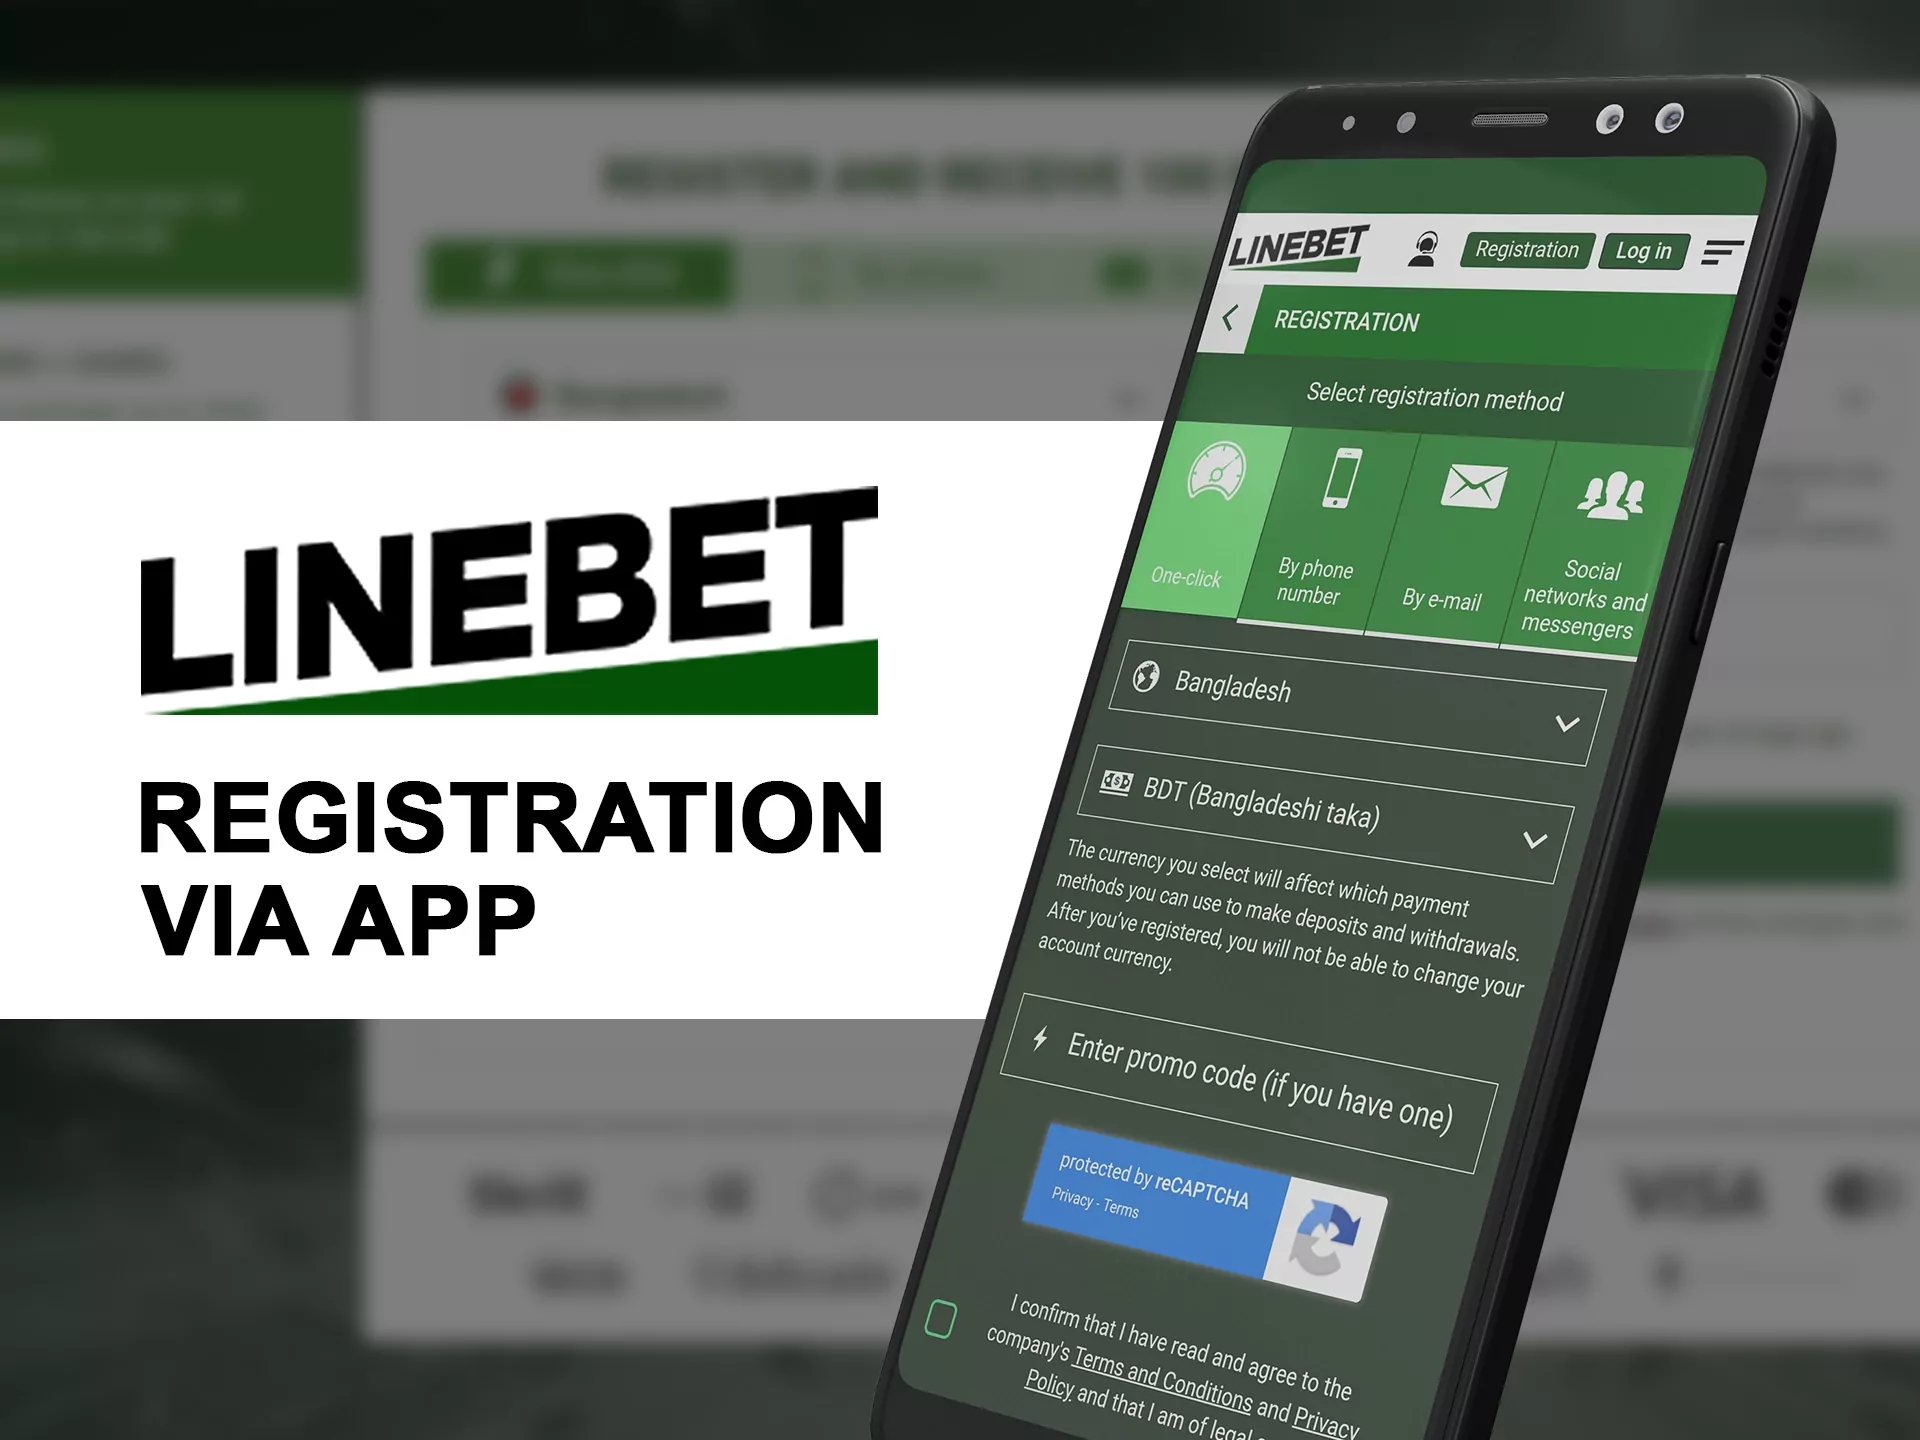 Registration process at Linebet app – step-by-step instruction.